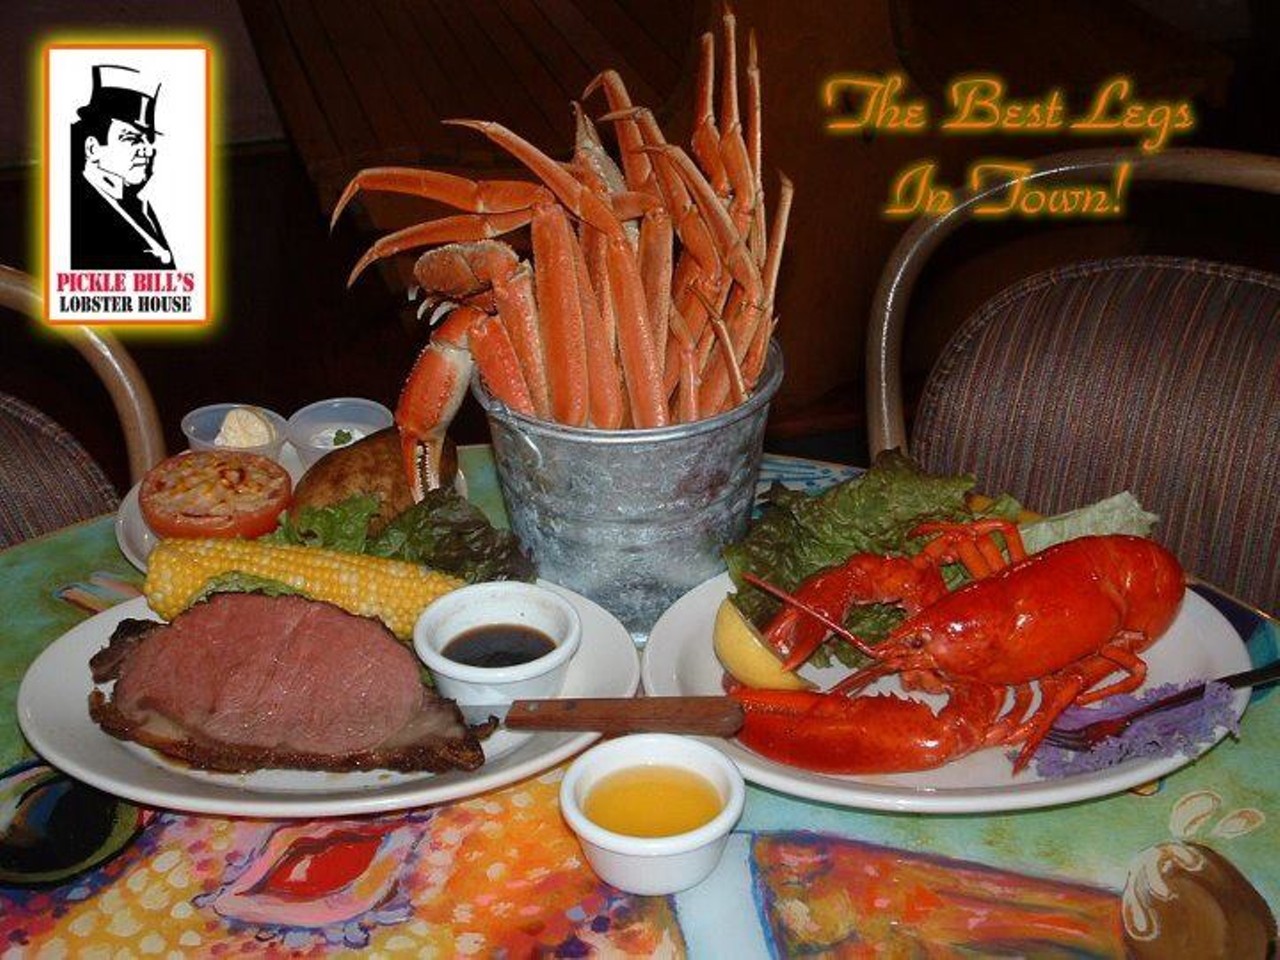 This waterfront venue offers more than a floating bar. In fact, their daily all-you-can-eat combo of prime rib and crab legs should be at the top of your list. A side and rolls are included as servers will deliver endless amount of fish and meat to your table. Pickle Bills is located at 101 River St, Grand River. Call 440-352-6343 or visit picklebills.com for more information.